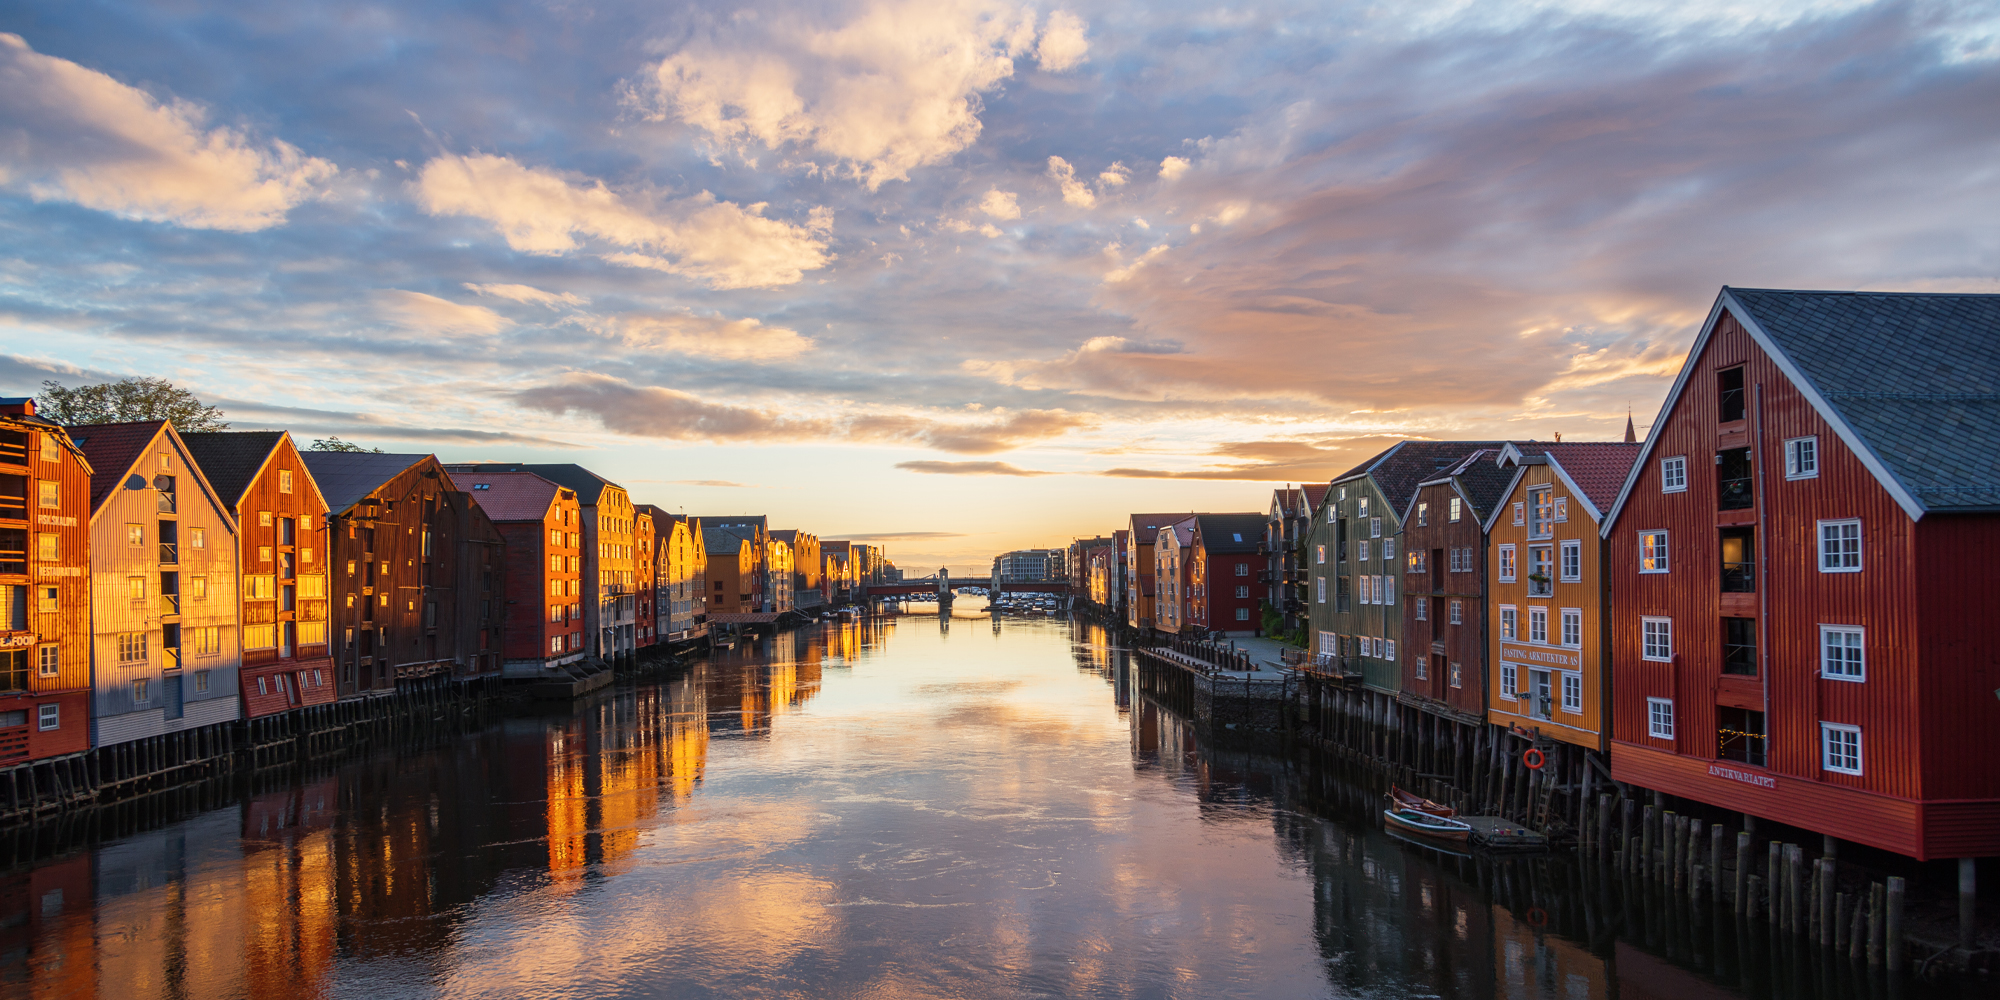 Sunset over the old wooden houses along the Nidelven river in Trondheim in Trøndelag, Norway